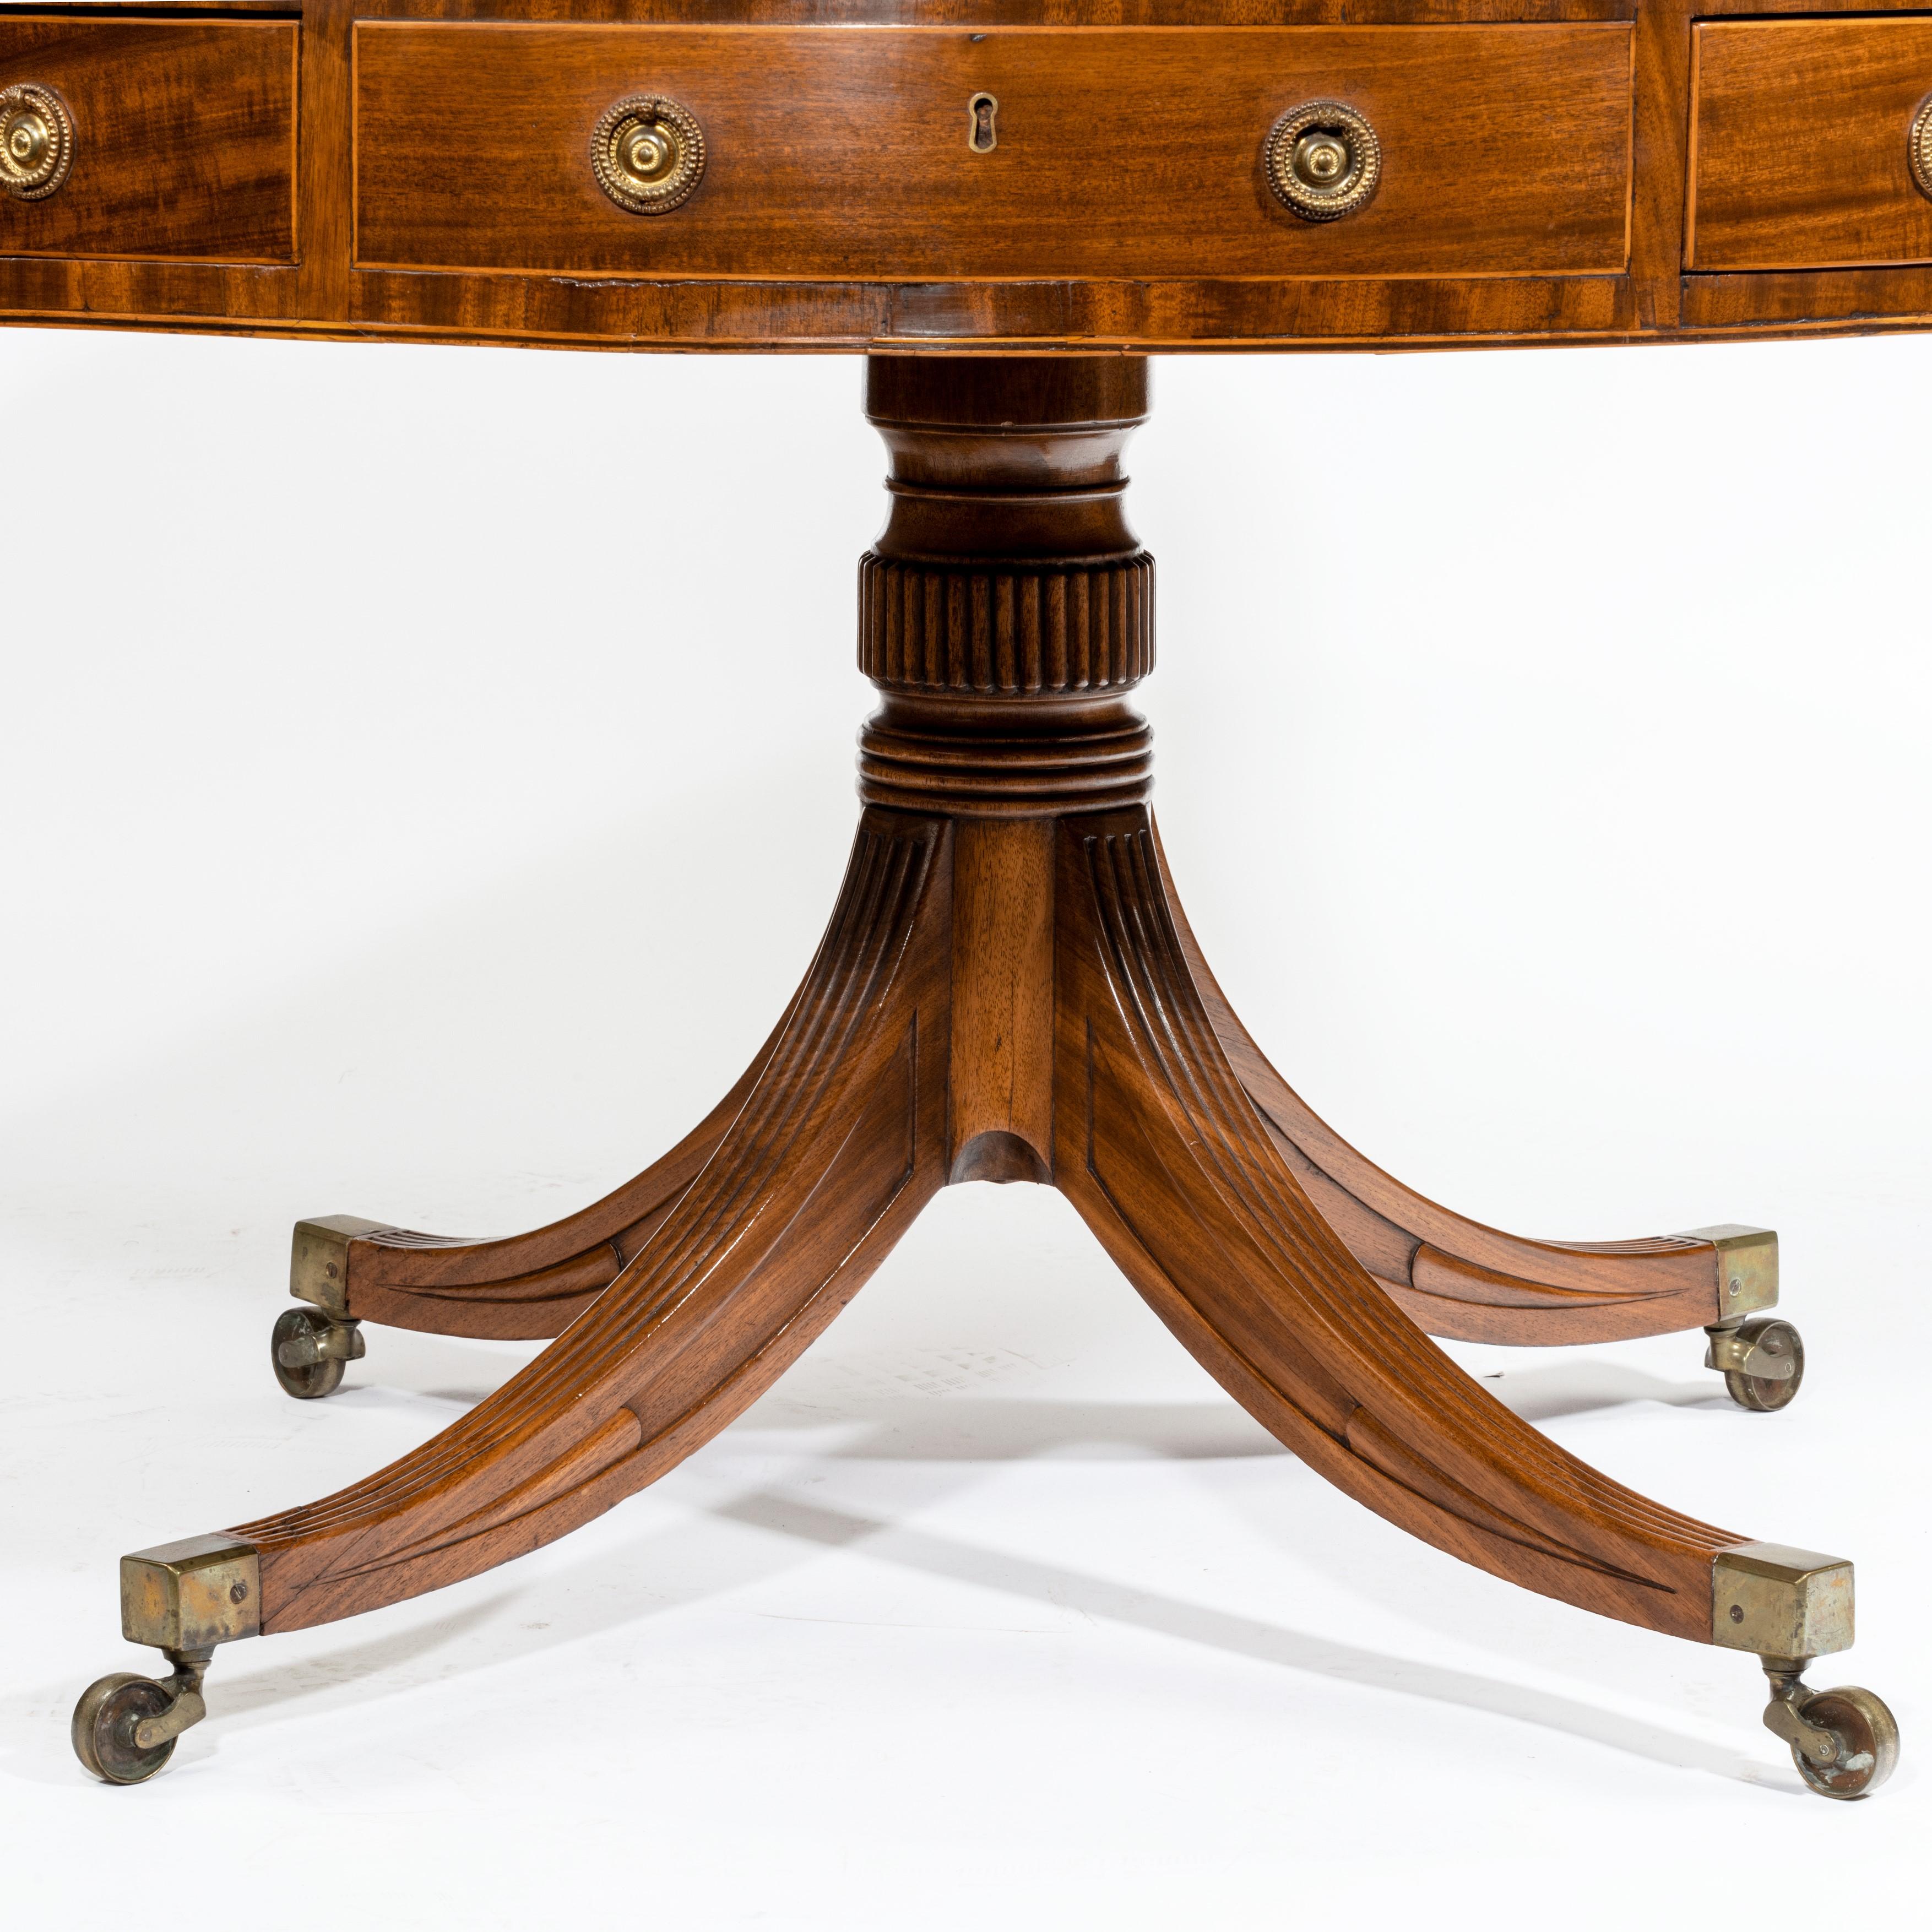 English Late George III Revolving Mahogany Drum Table Attributed to Gillows For Sale